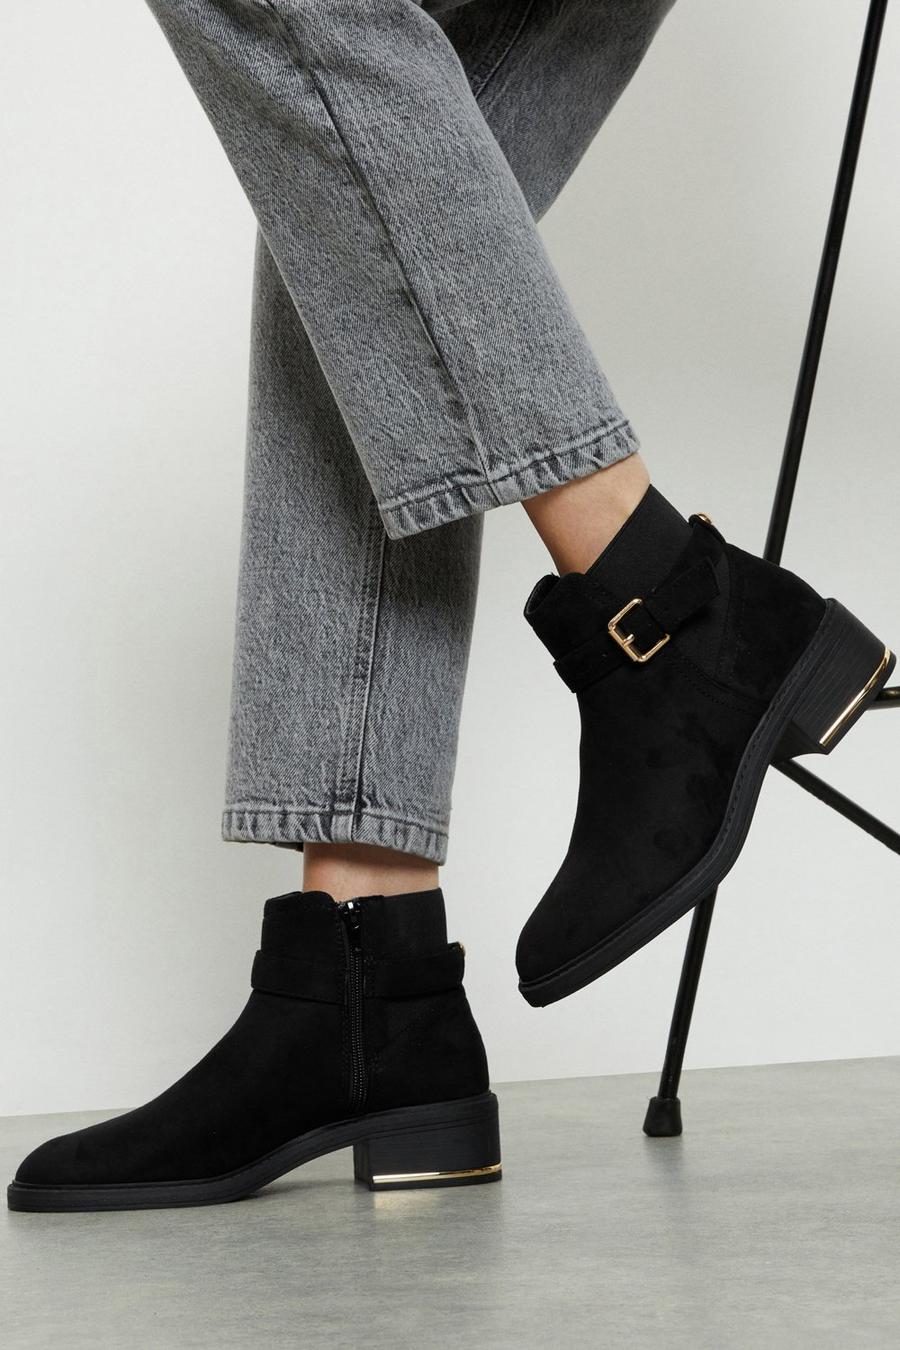 Milly Buckle Detail Ankle Boot